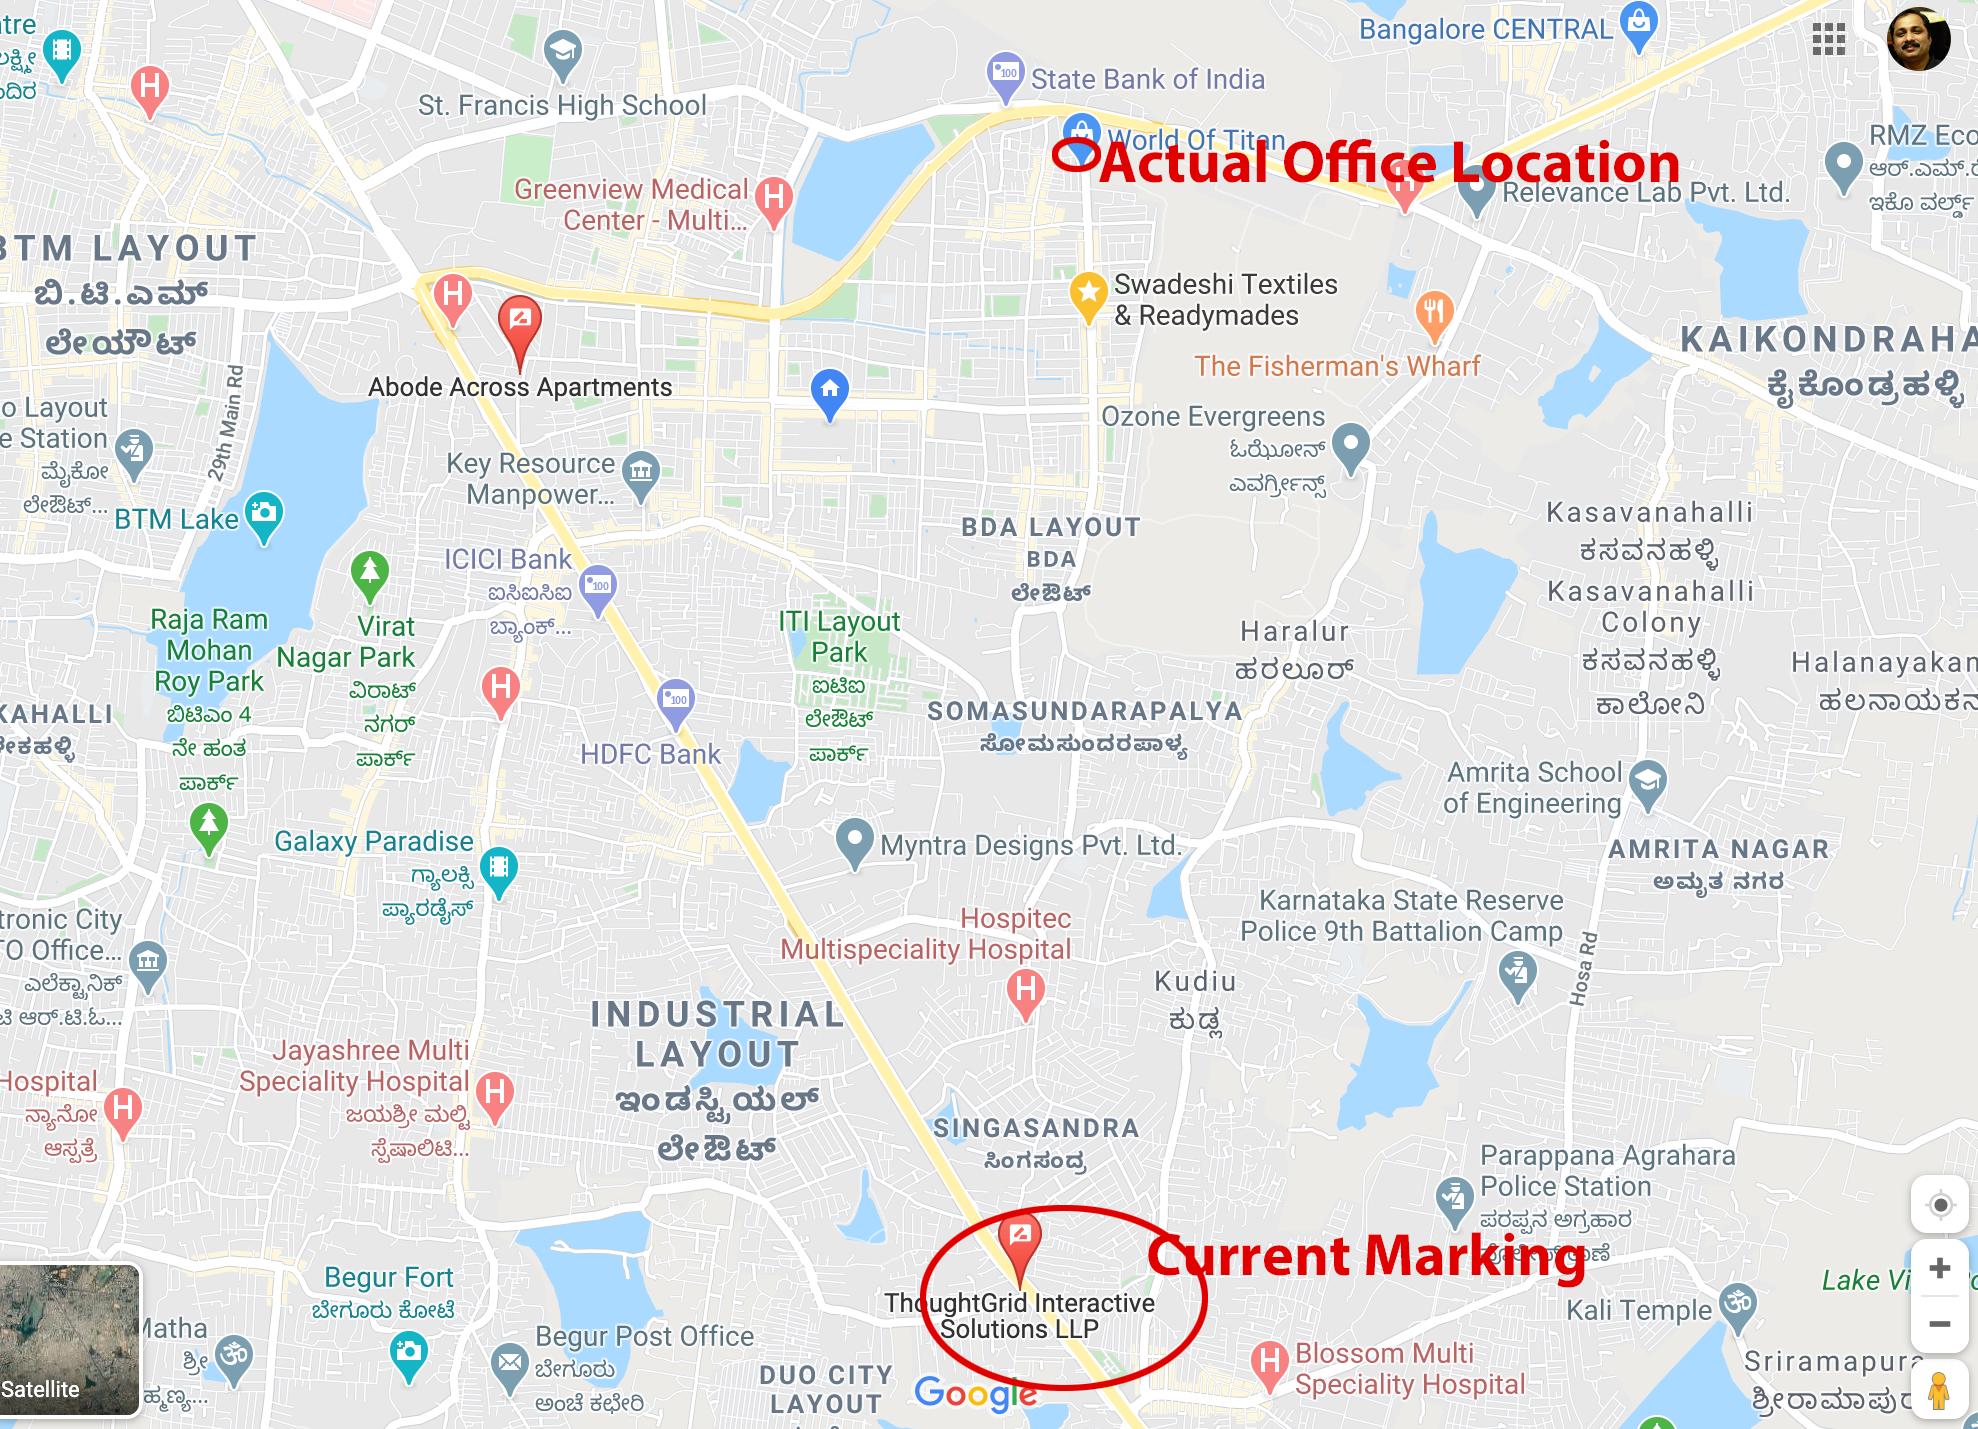 Why is my business showing a wrong location on Google Maps?